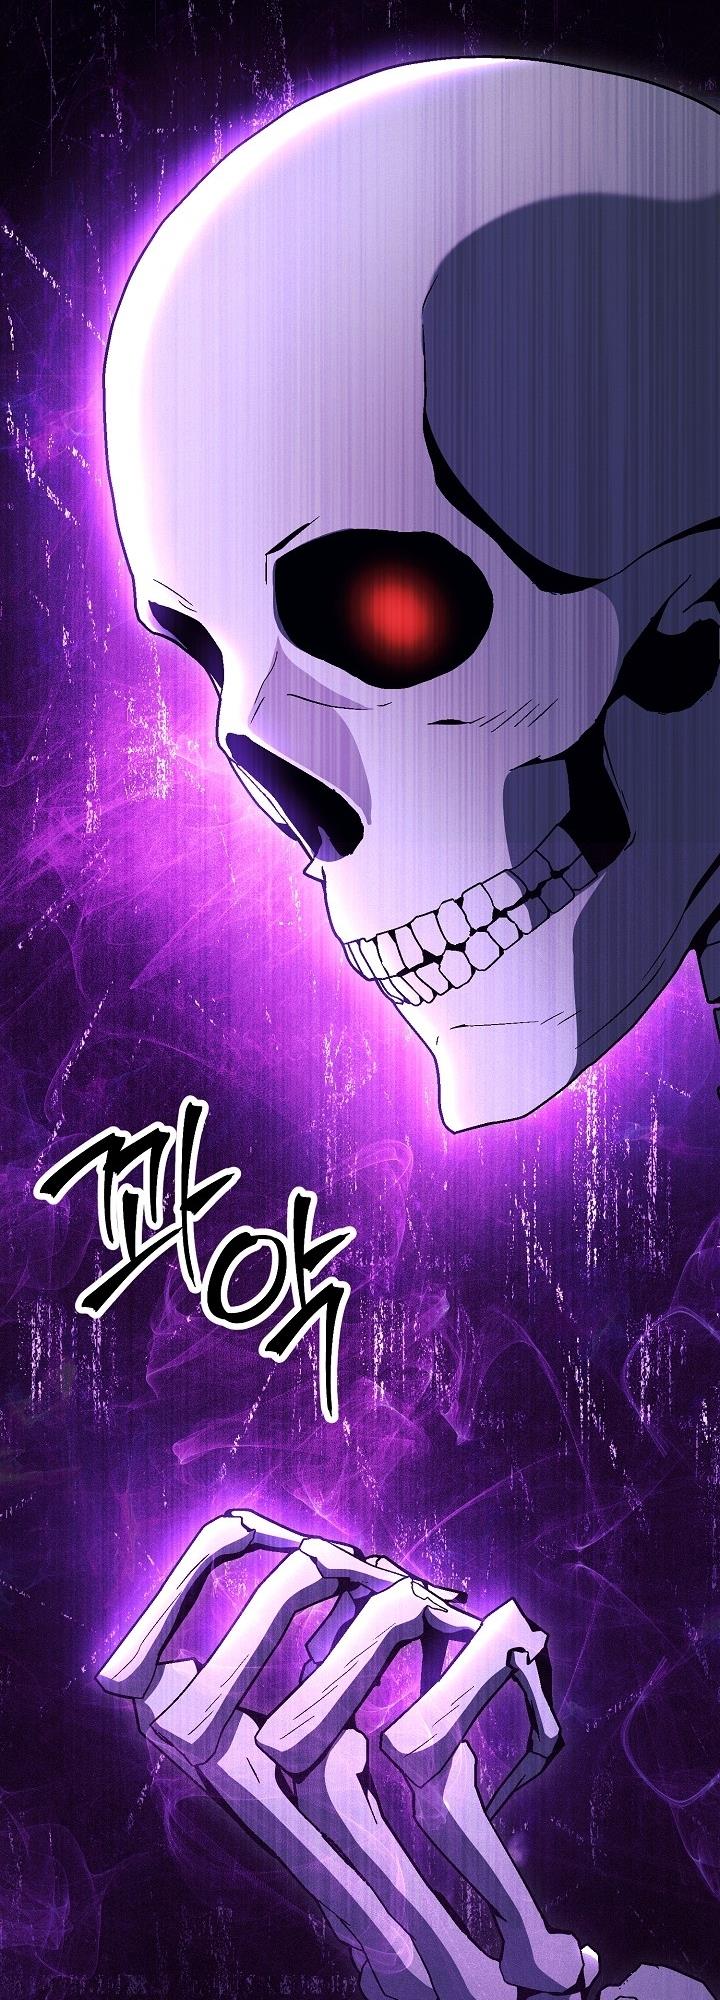 Skeleton Soldier Couldn’t Protect the Dungeon Chapter 183